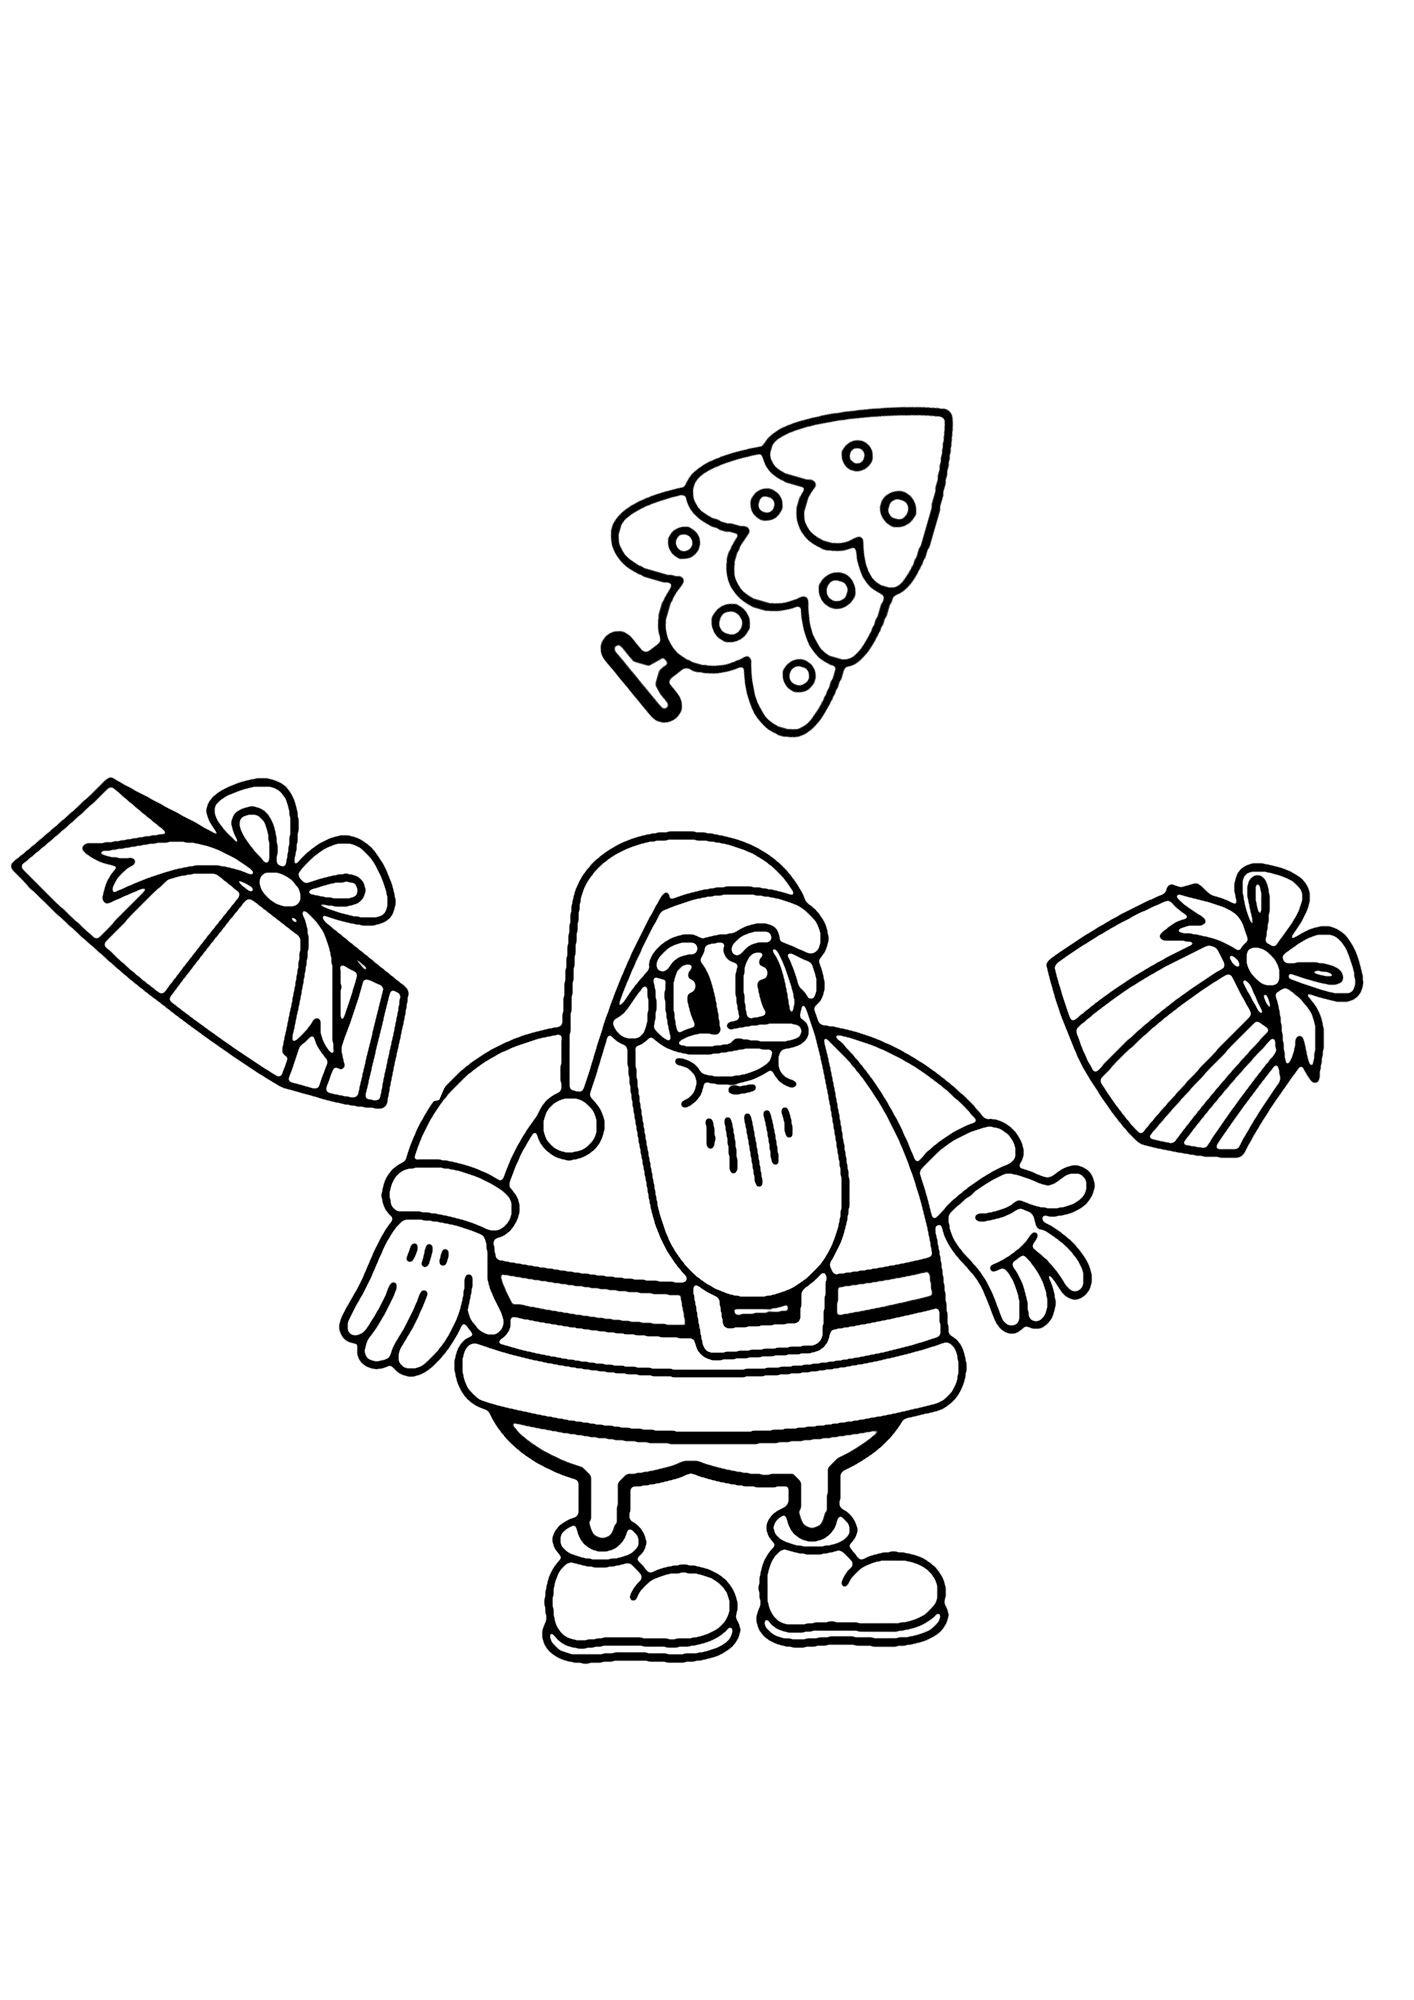 Santa Claus With Gifts Coloring page